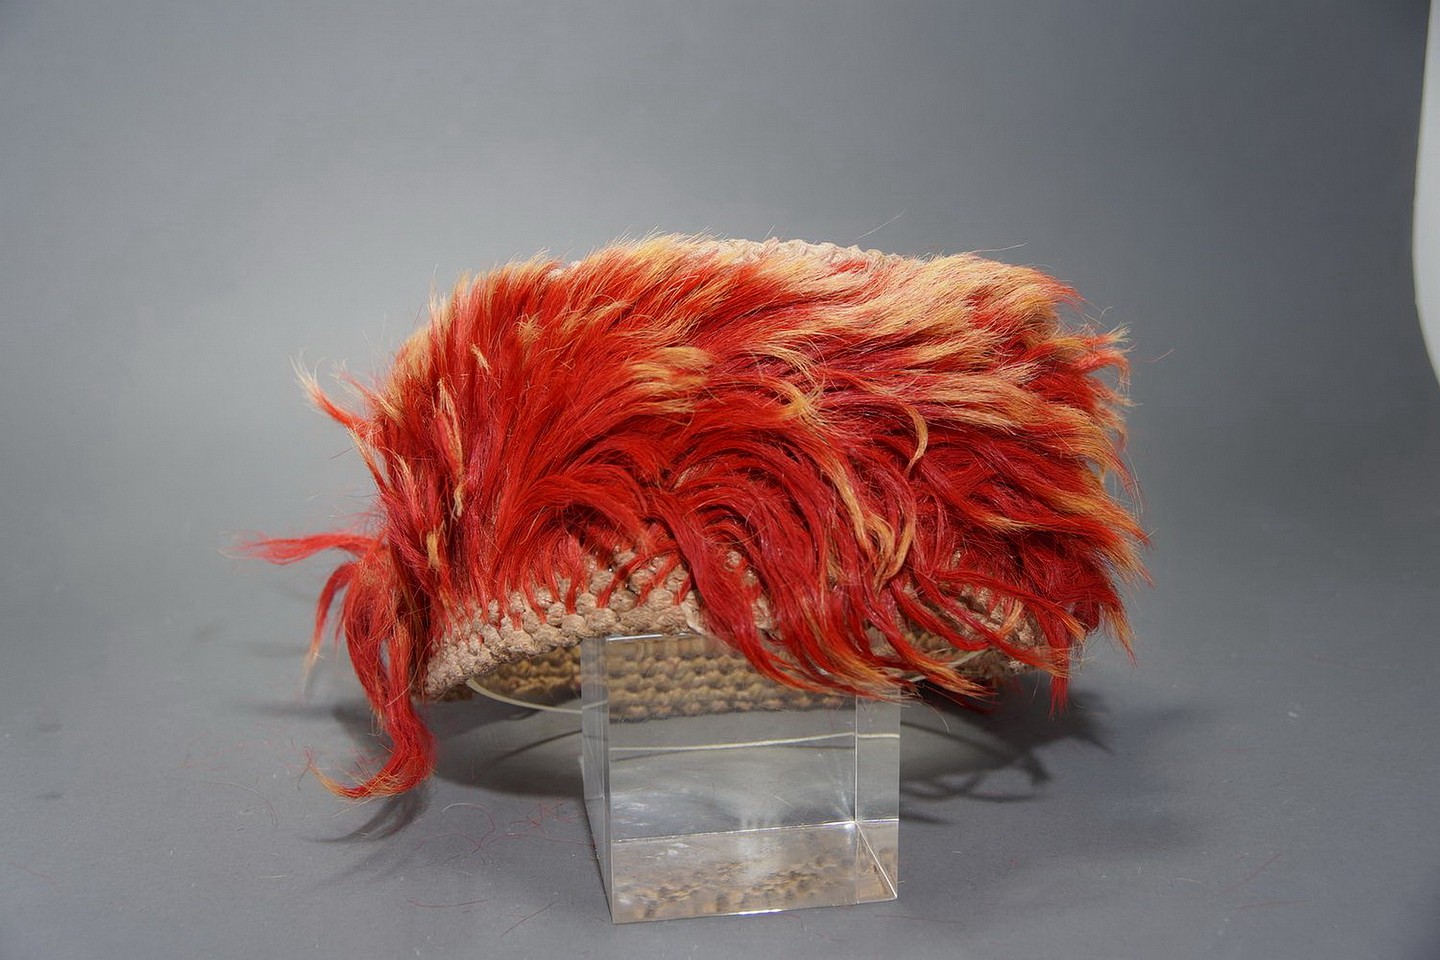 Peru, Nasca Headband with Orange Tie-dye Llama Hair
These unusual headbands are made of a cotton knotted mesh with shanks of llama hair tied into the knots.  The inside does not show any of the shanks of hair.
Media: Textile
Dimensions: Diameter 7.5" x Height 4"
$2,750
p1040